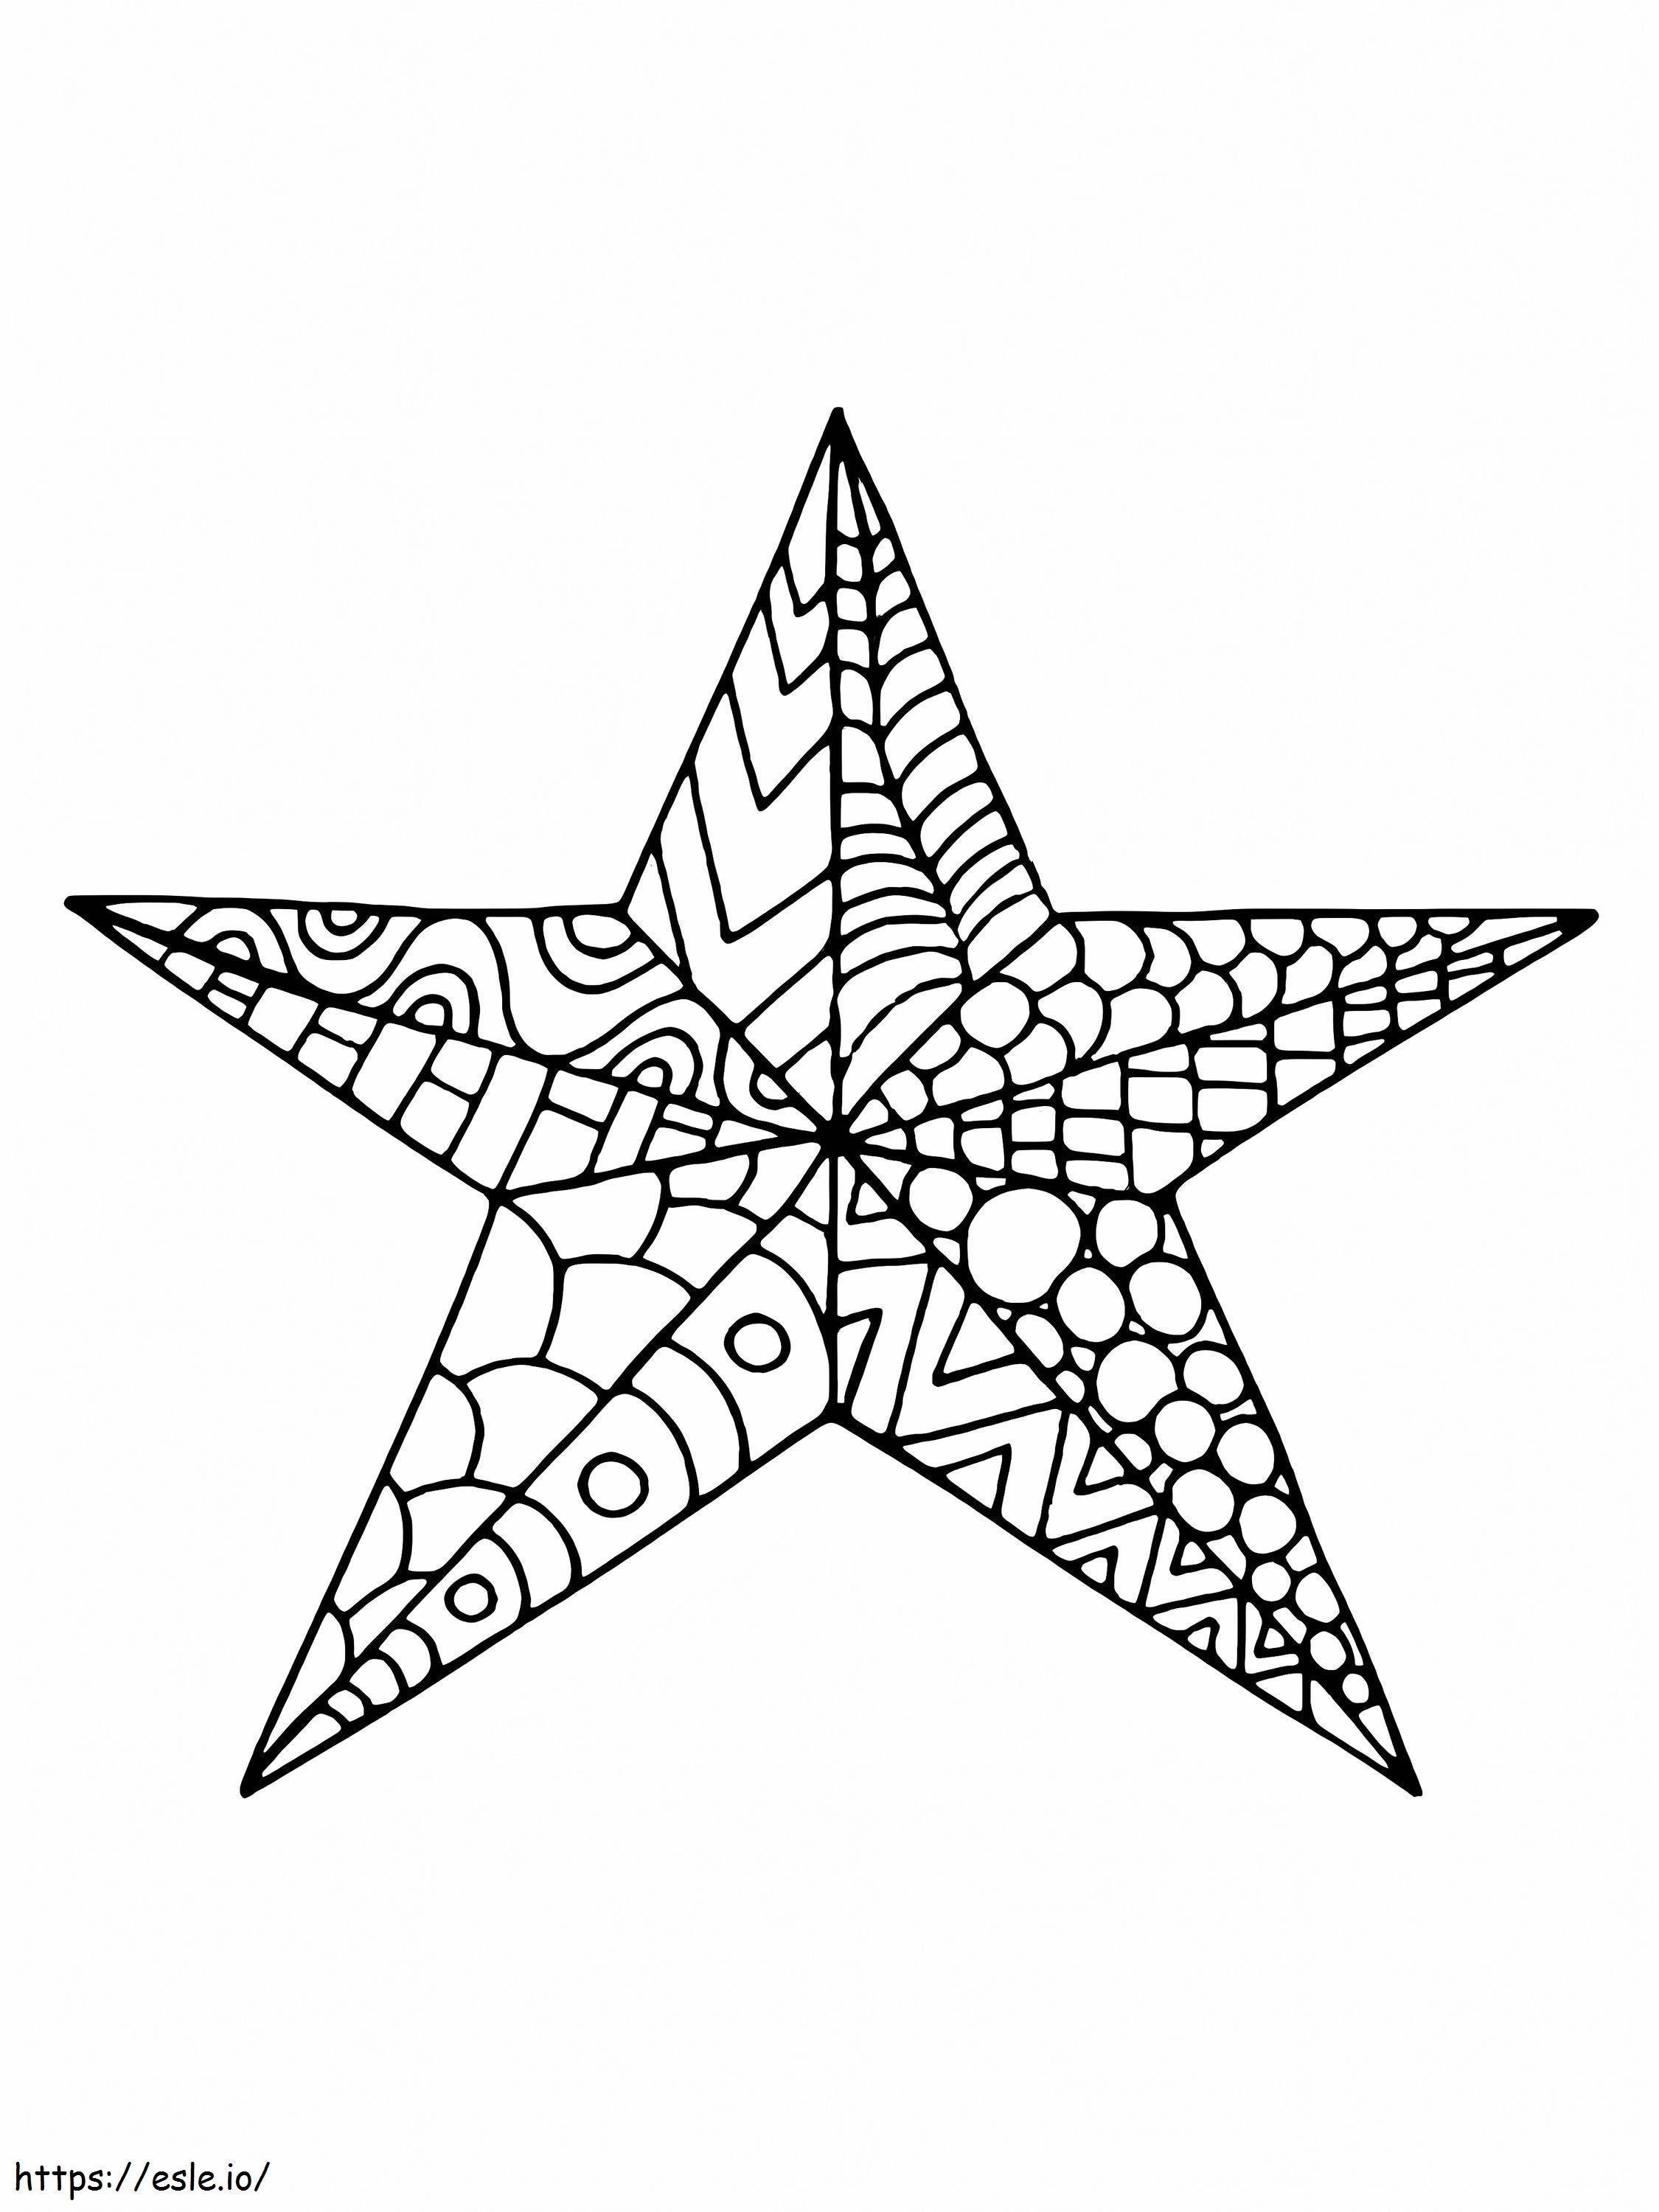 Estrella Is For Adults coloring page